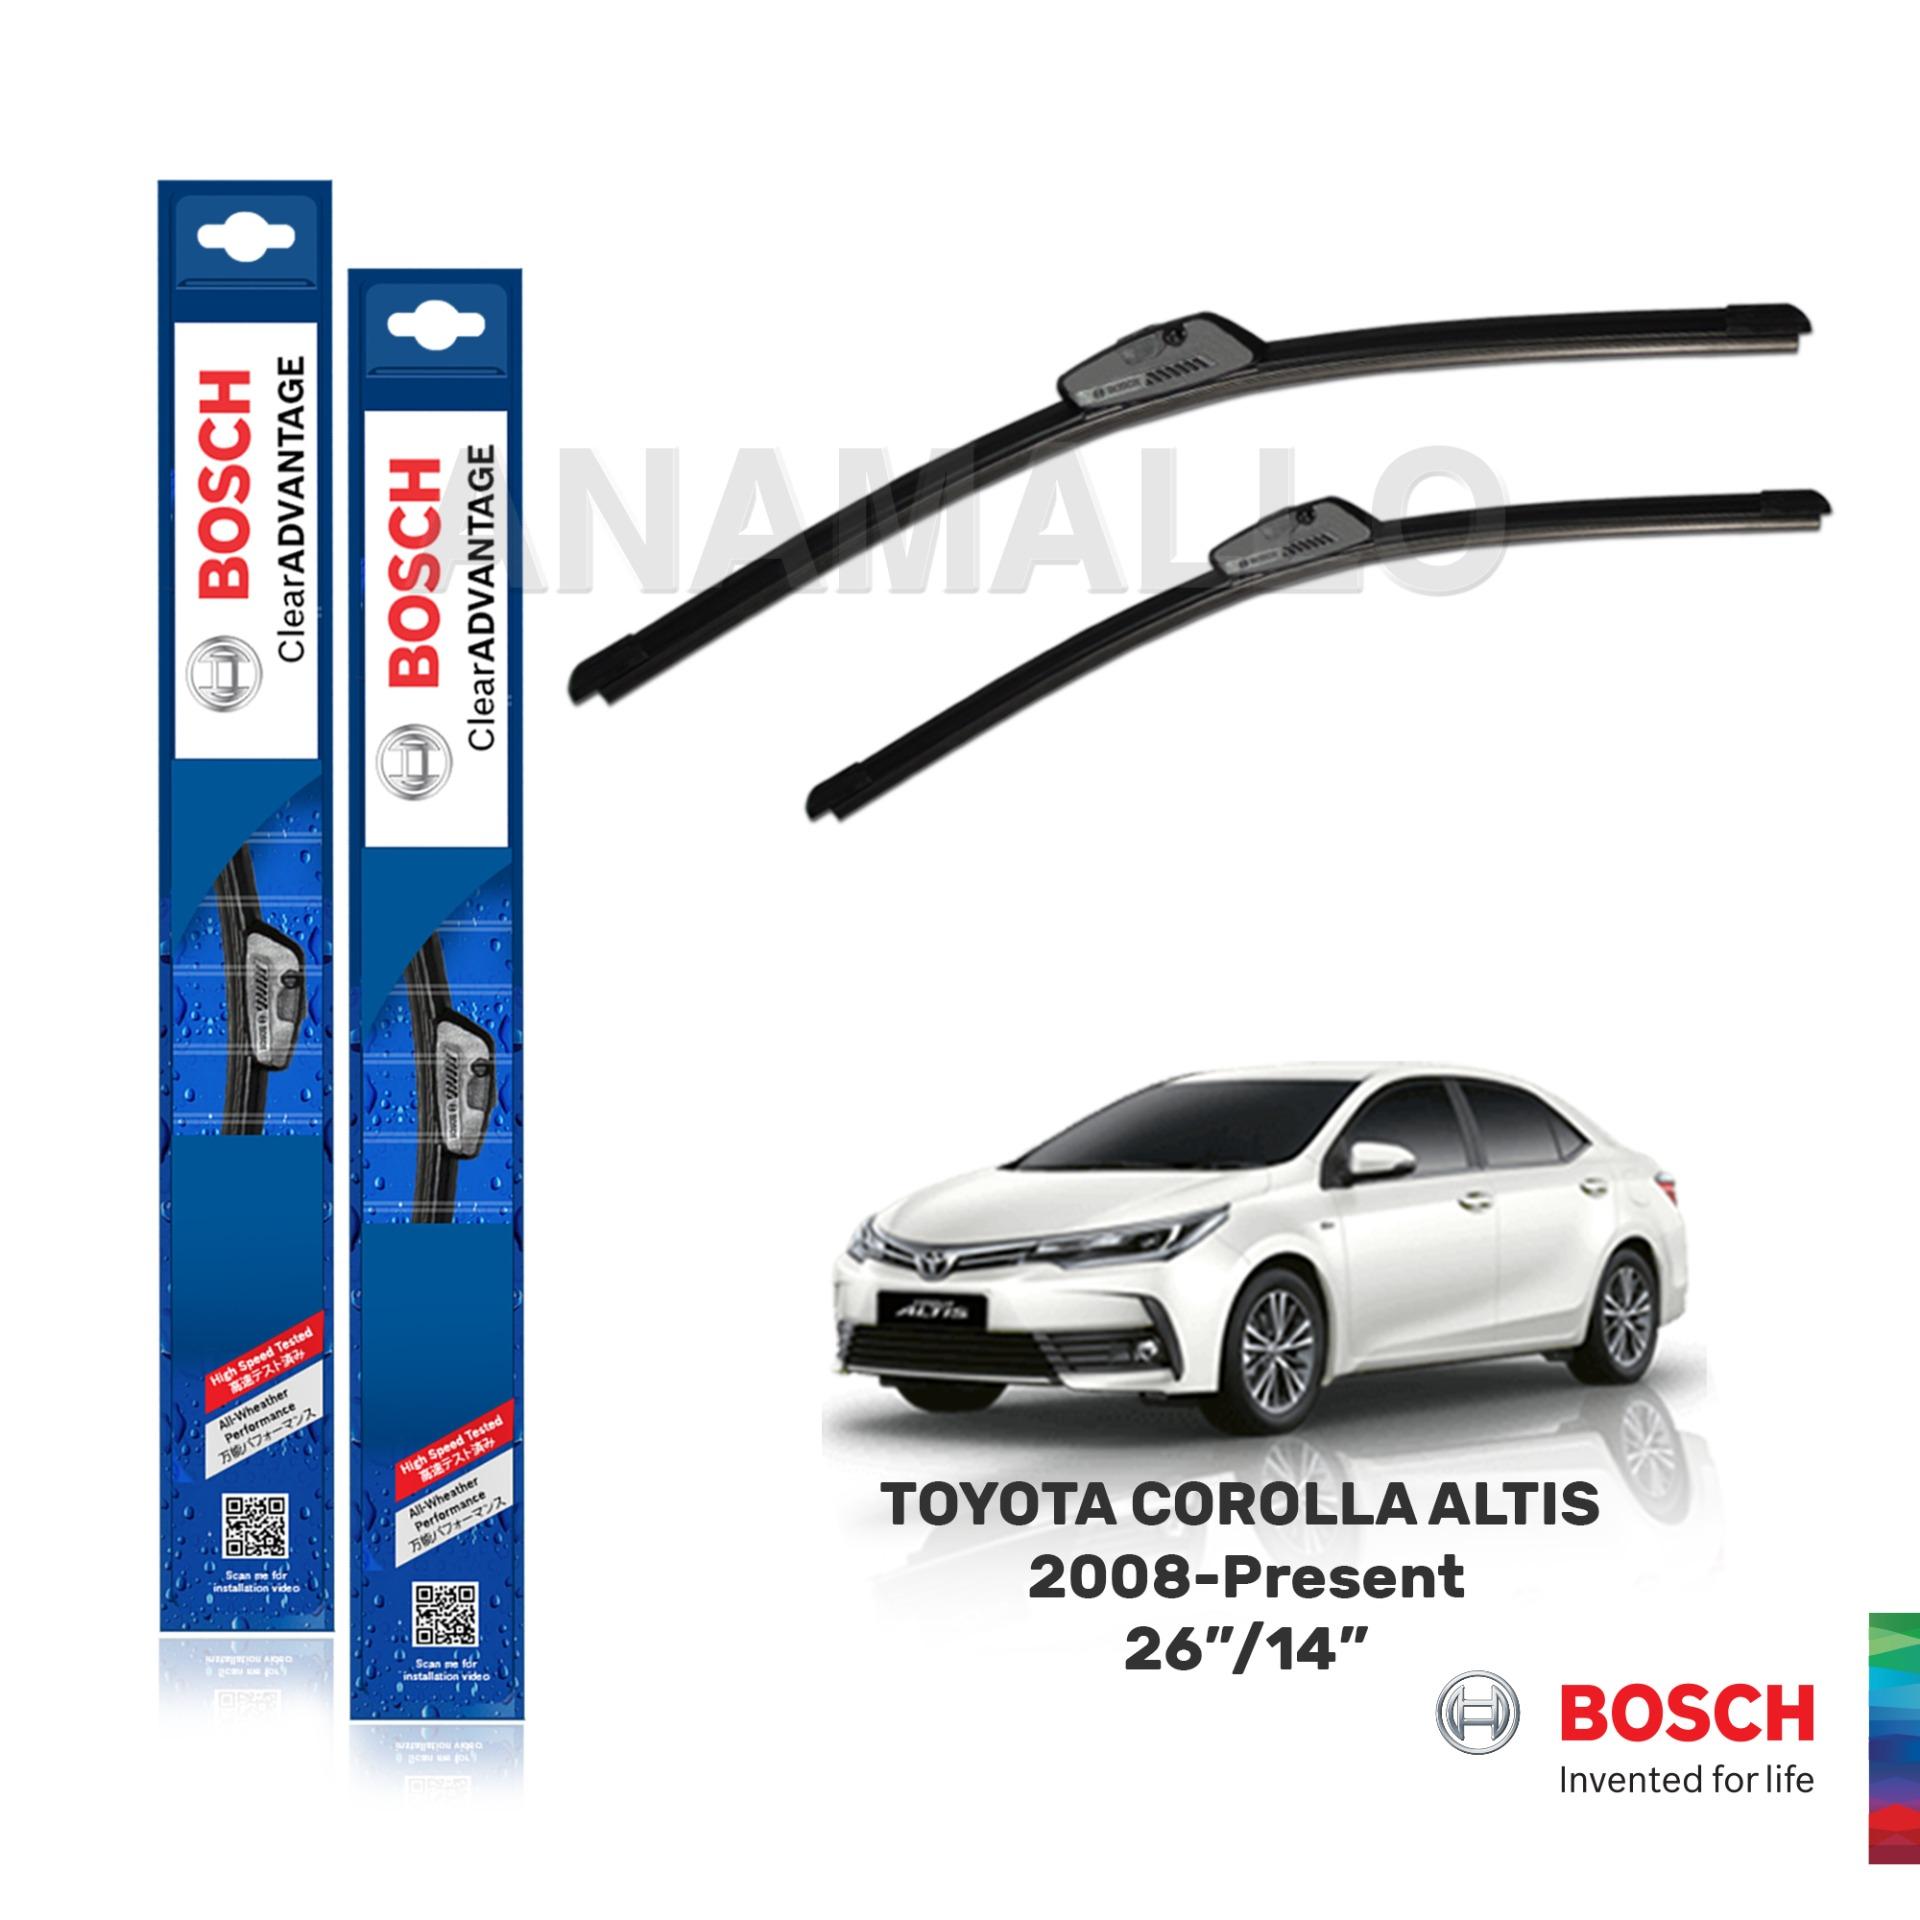 eBay offers JHOOK hybrid silicone windshield wiper blades suitable for the 2020-2023 Toyota Corolla.